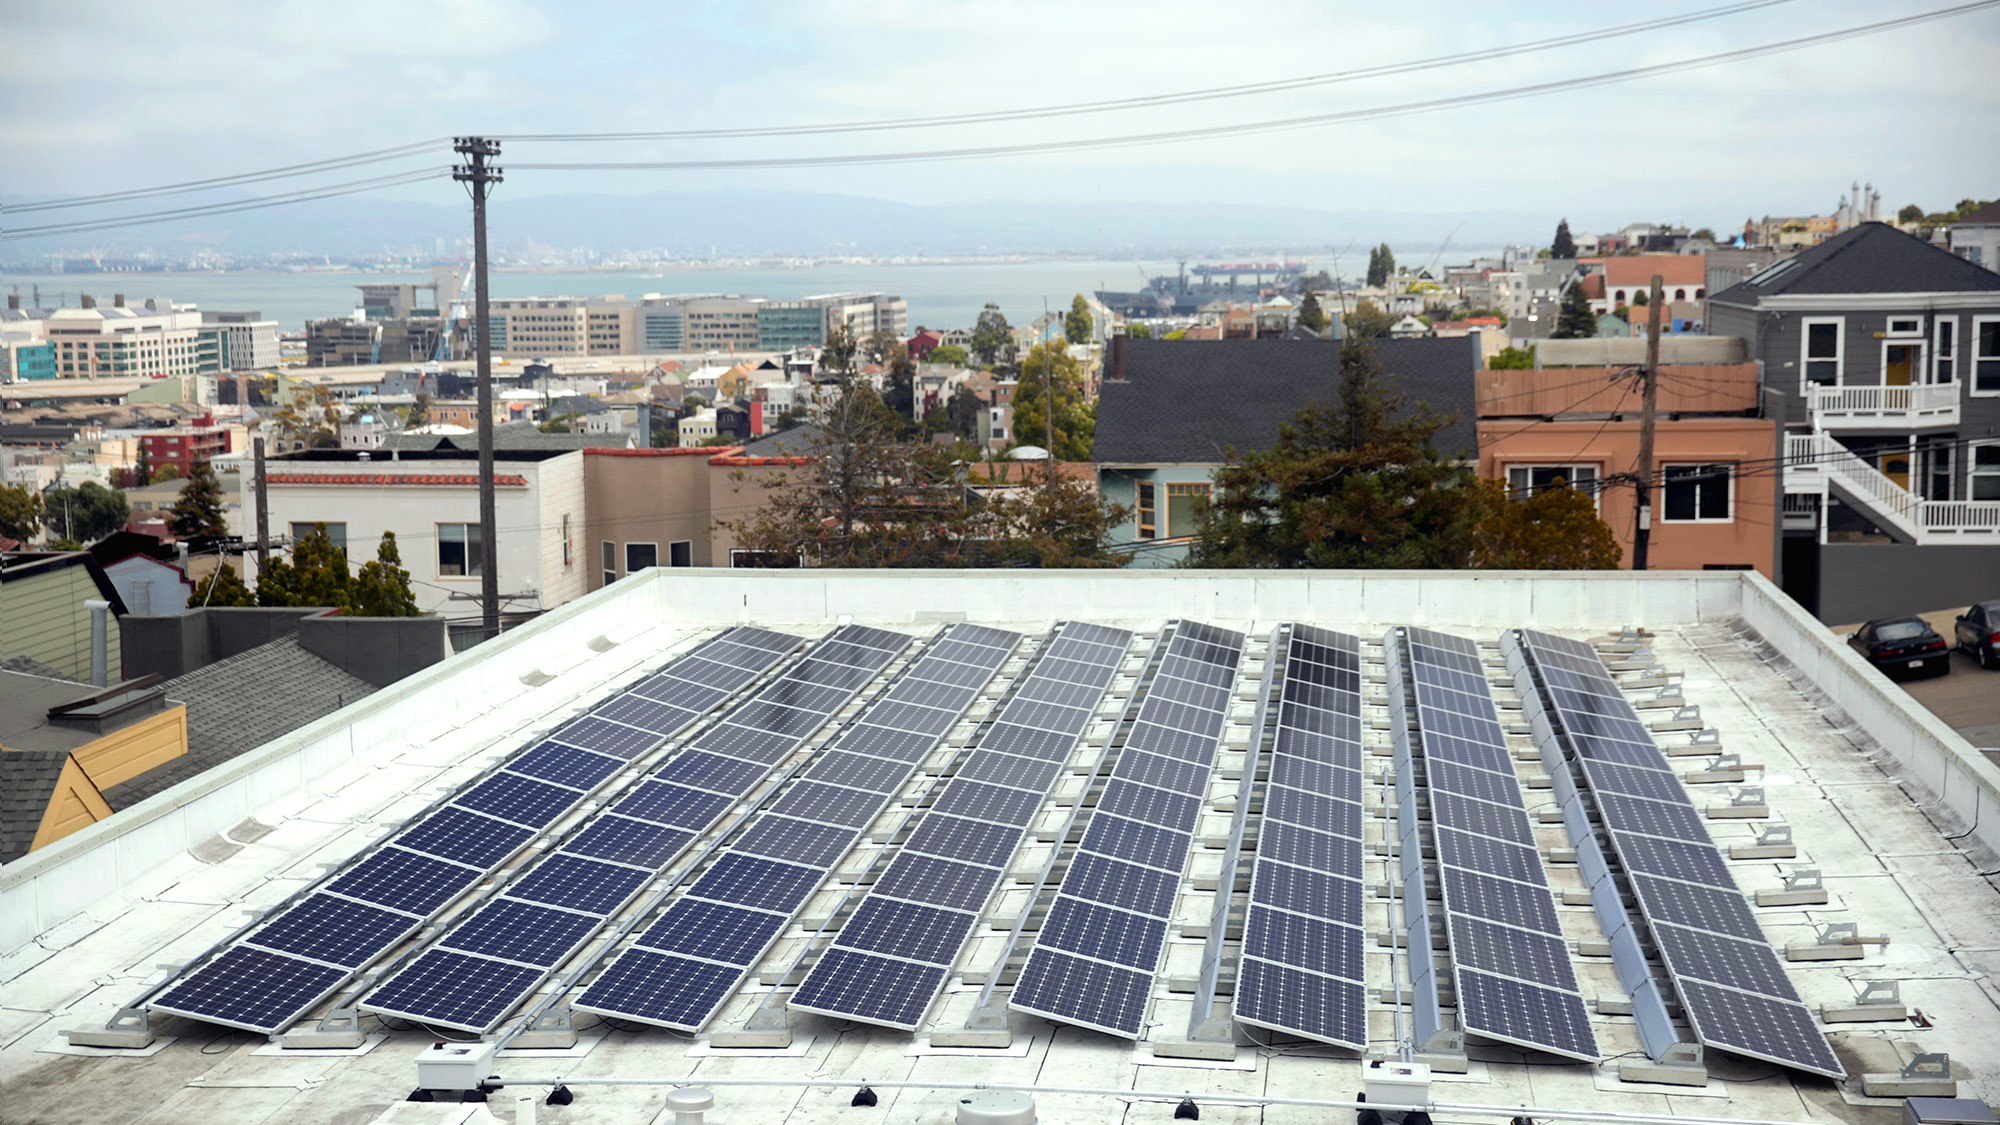 The new solar array on the roof of the Downtown High School in San Francisco, California